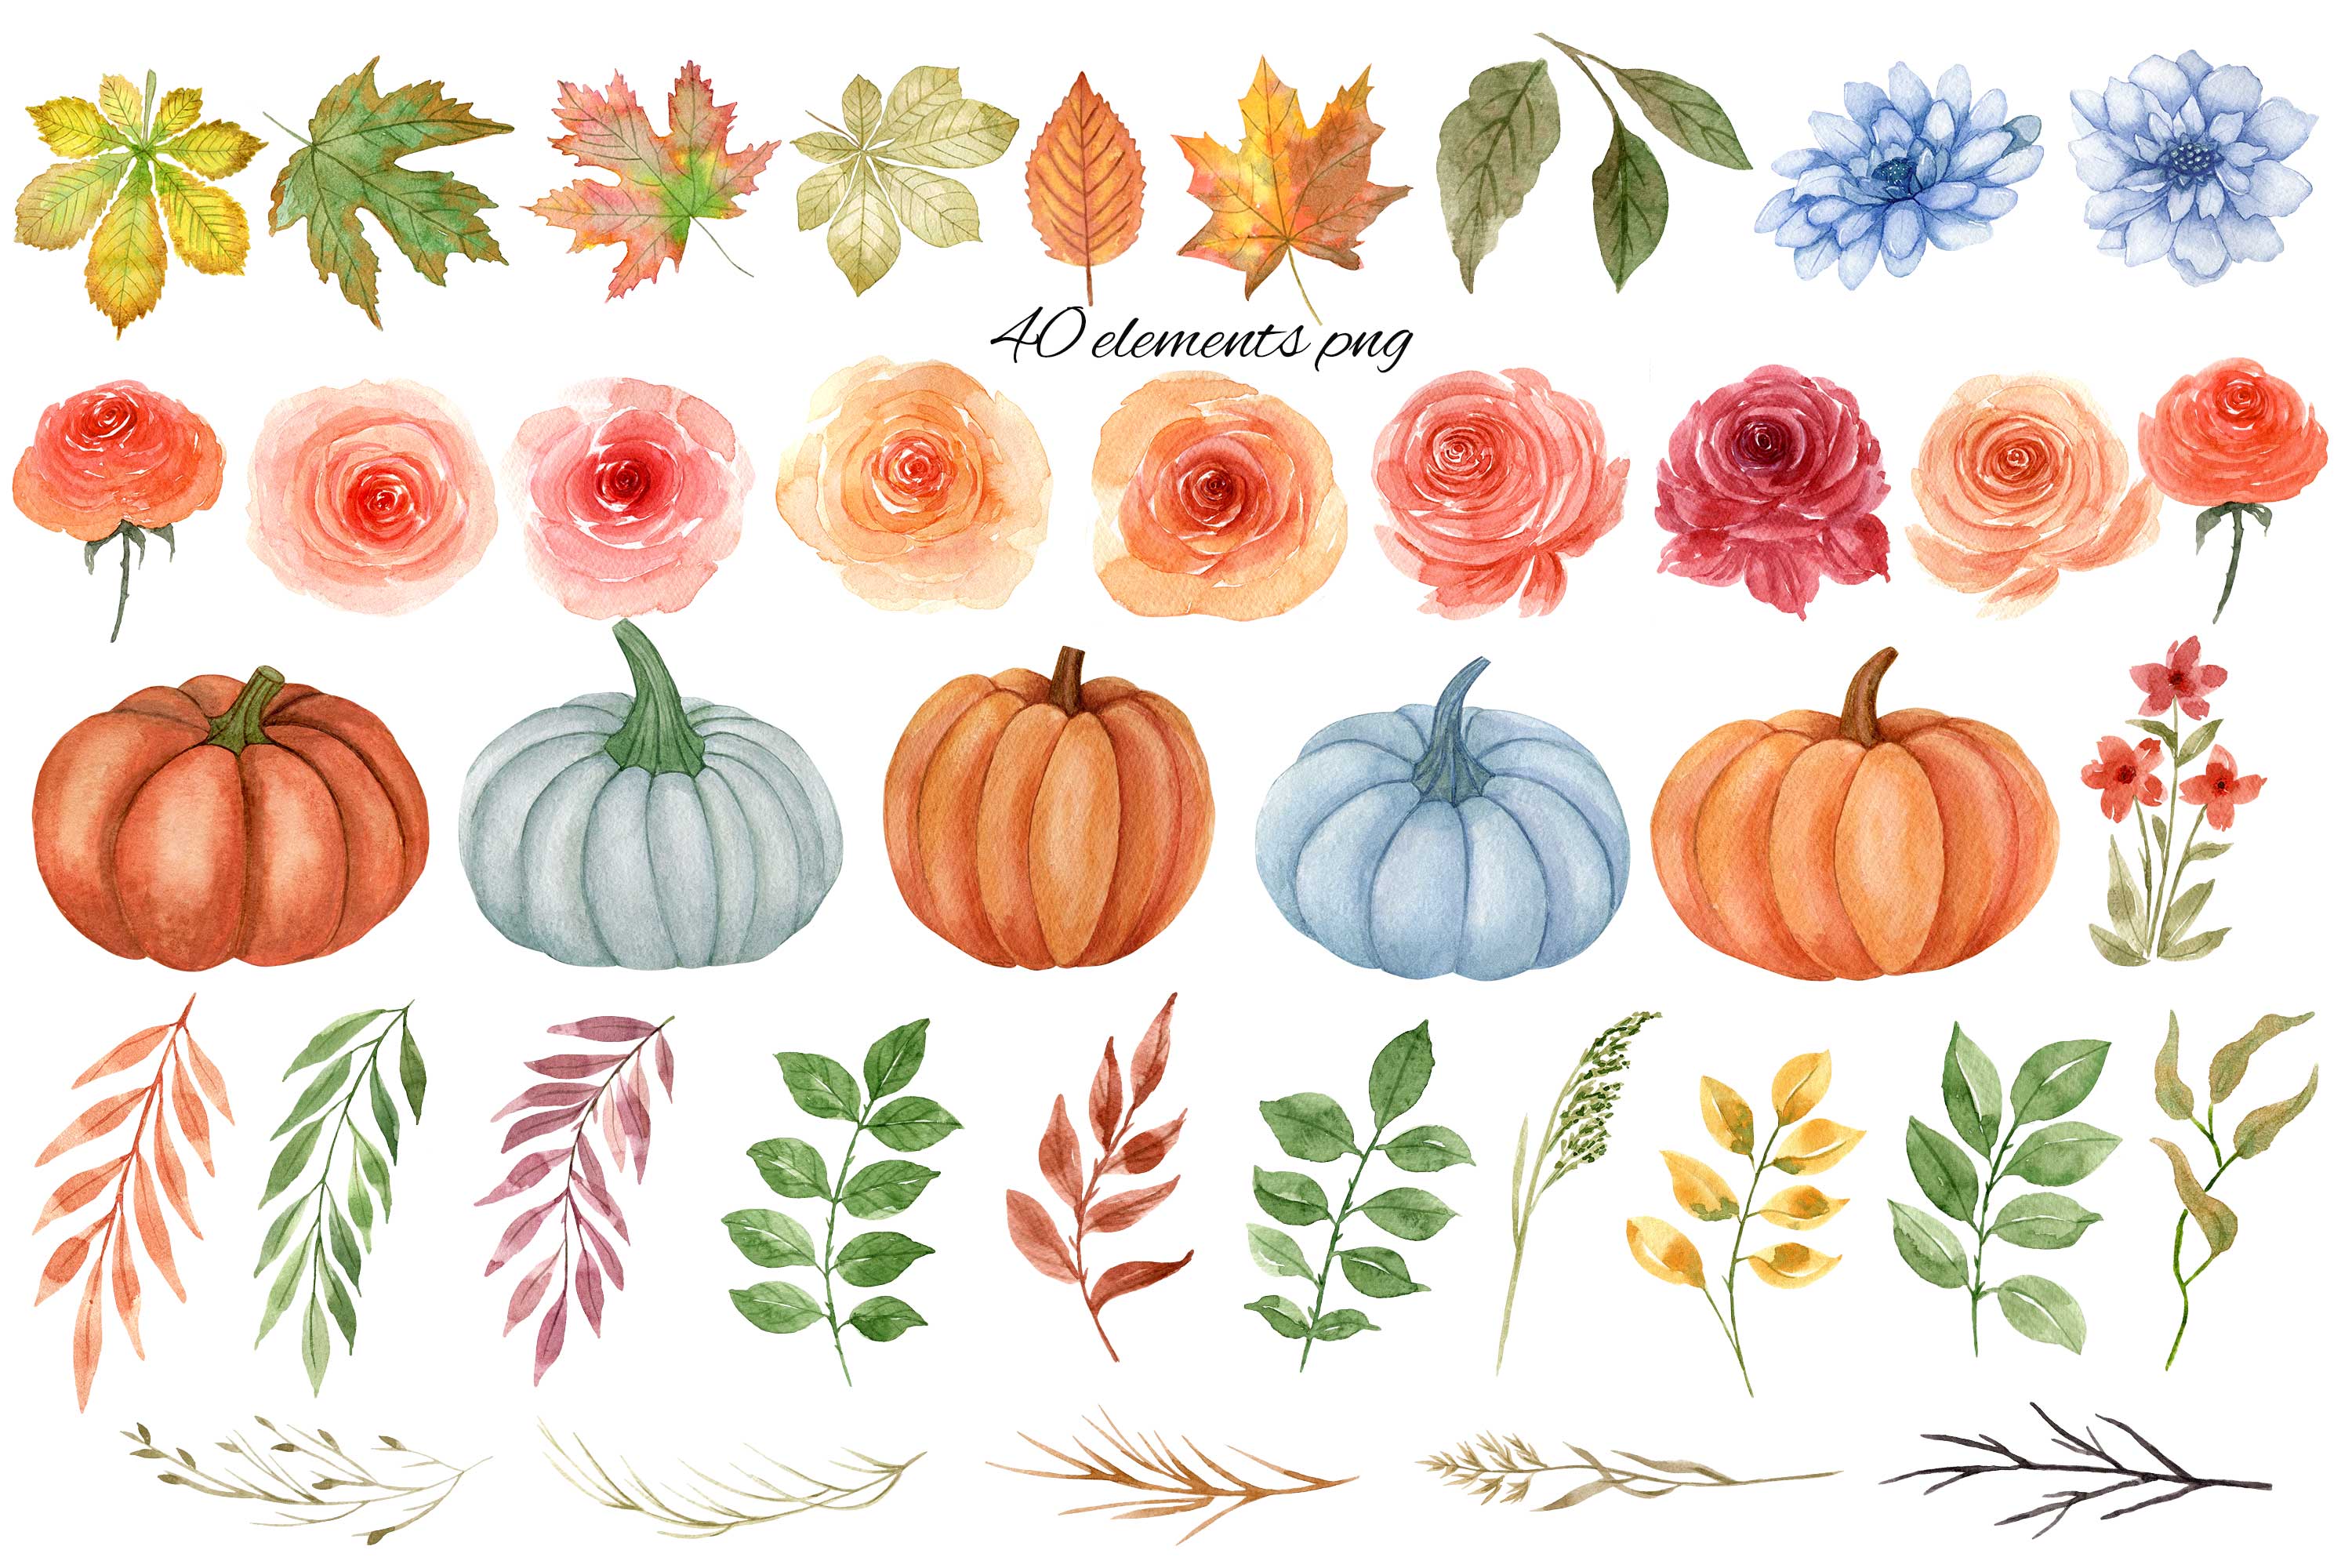 Watercolor Autumn Compositions with Pumpkins and Flowers elements.